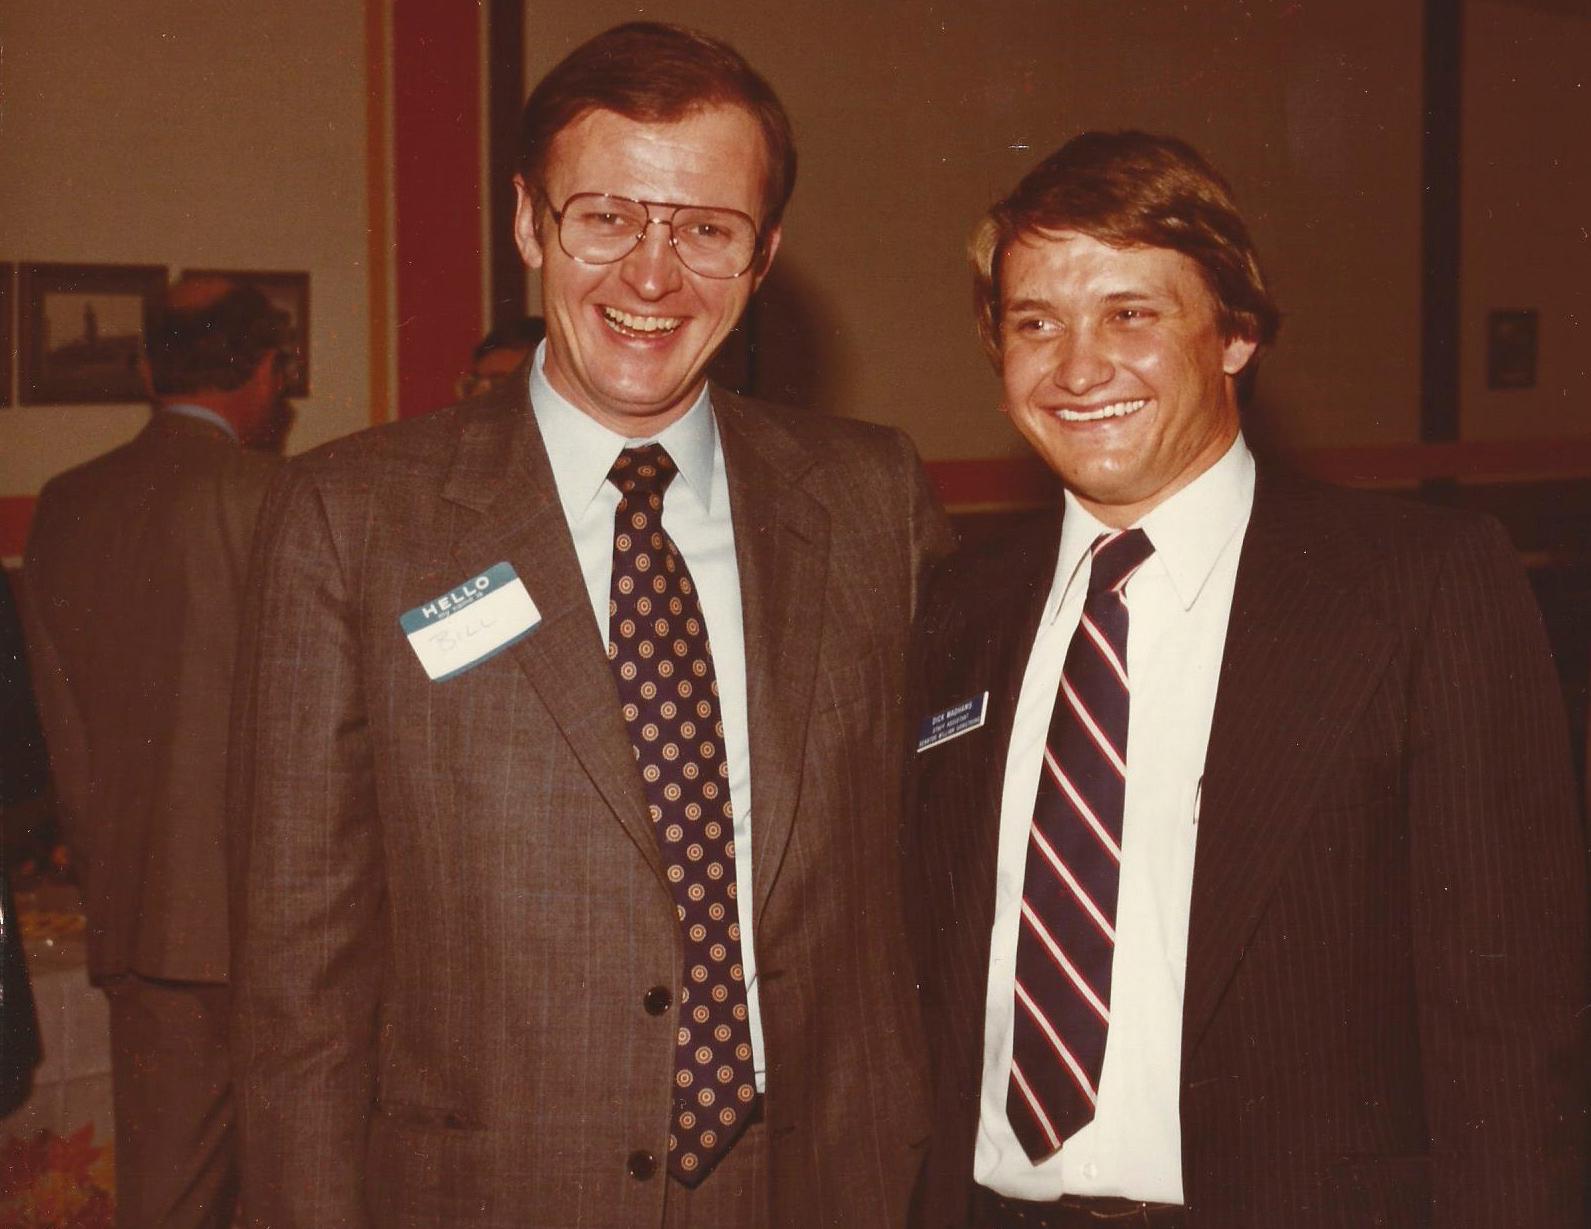 Photo: Former U.S. Sen. Bill Armstrong with Dick Wadhams